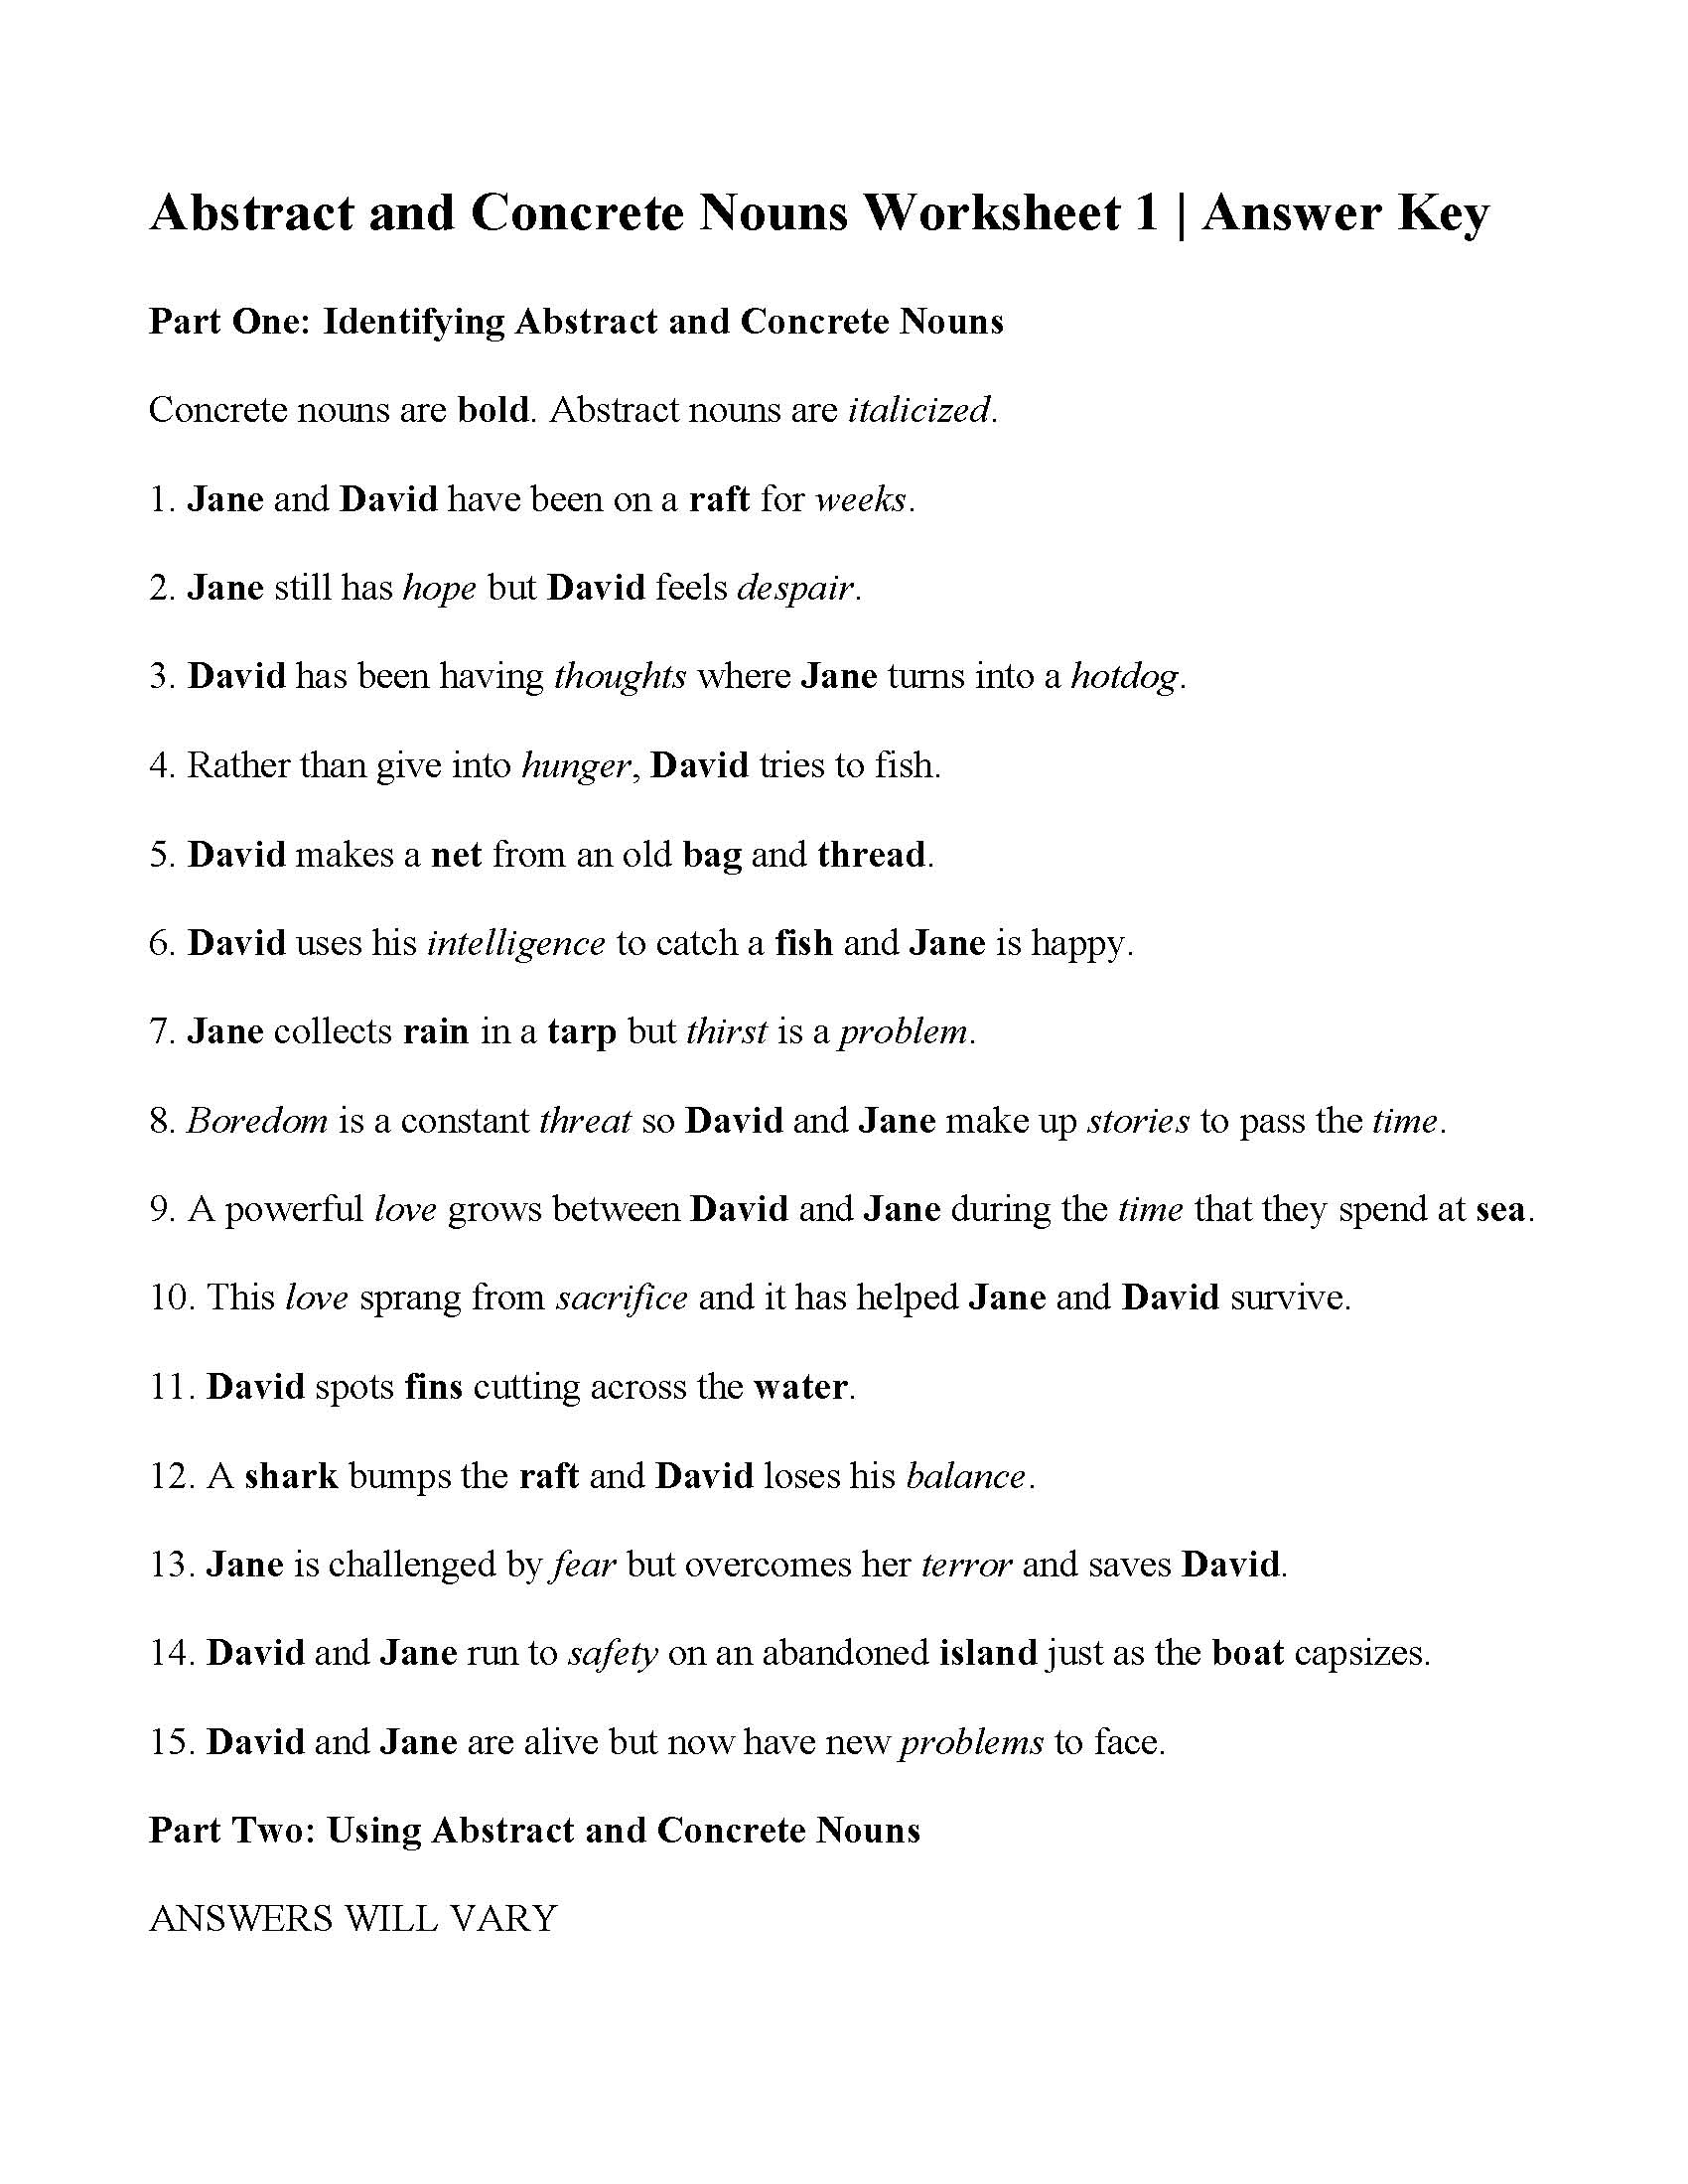 Concrete and Abstract Nouns Worksheet  Answers Inside Concrete And Abstract Nouns Worksheet